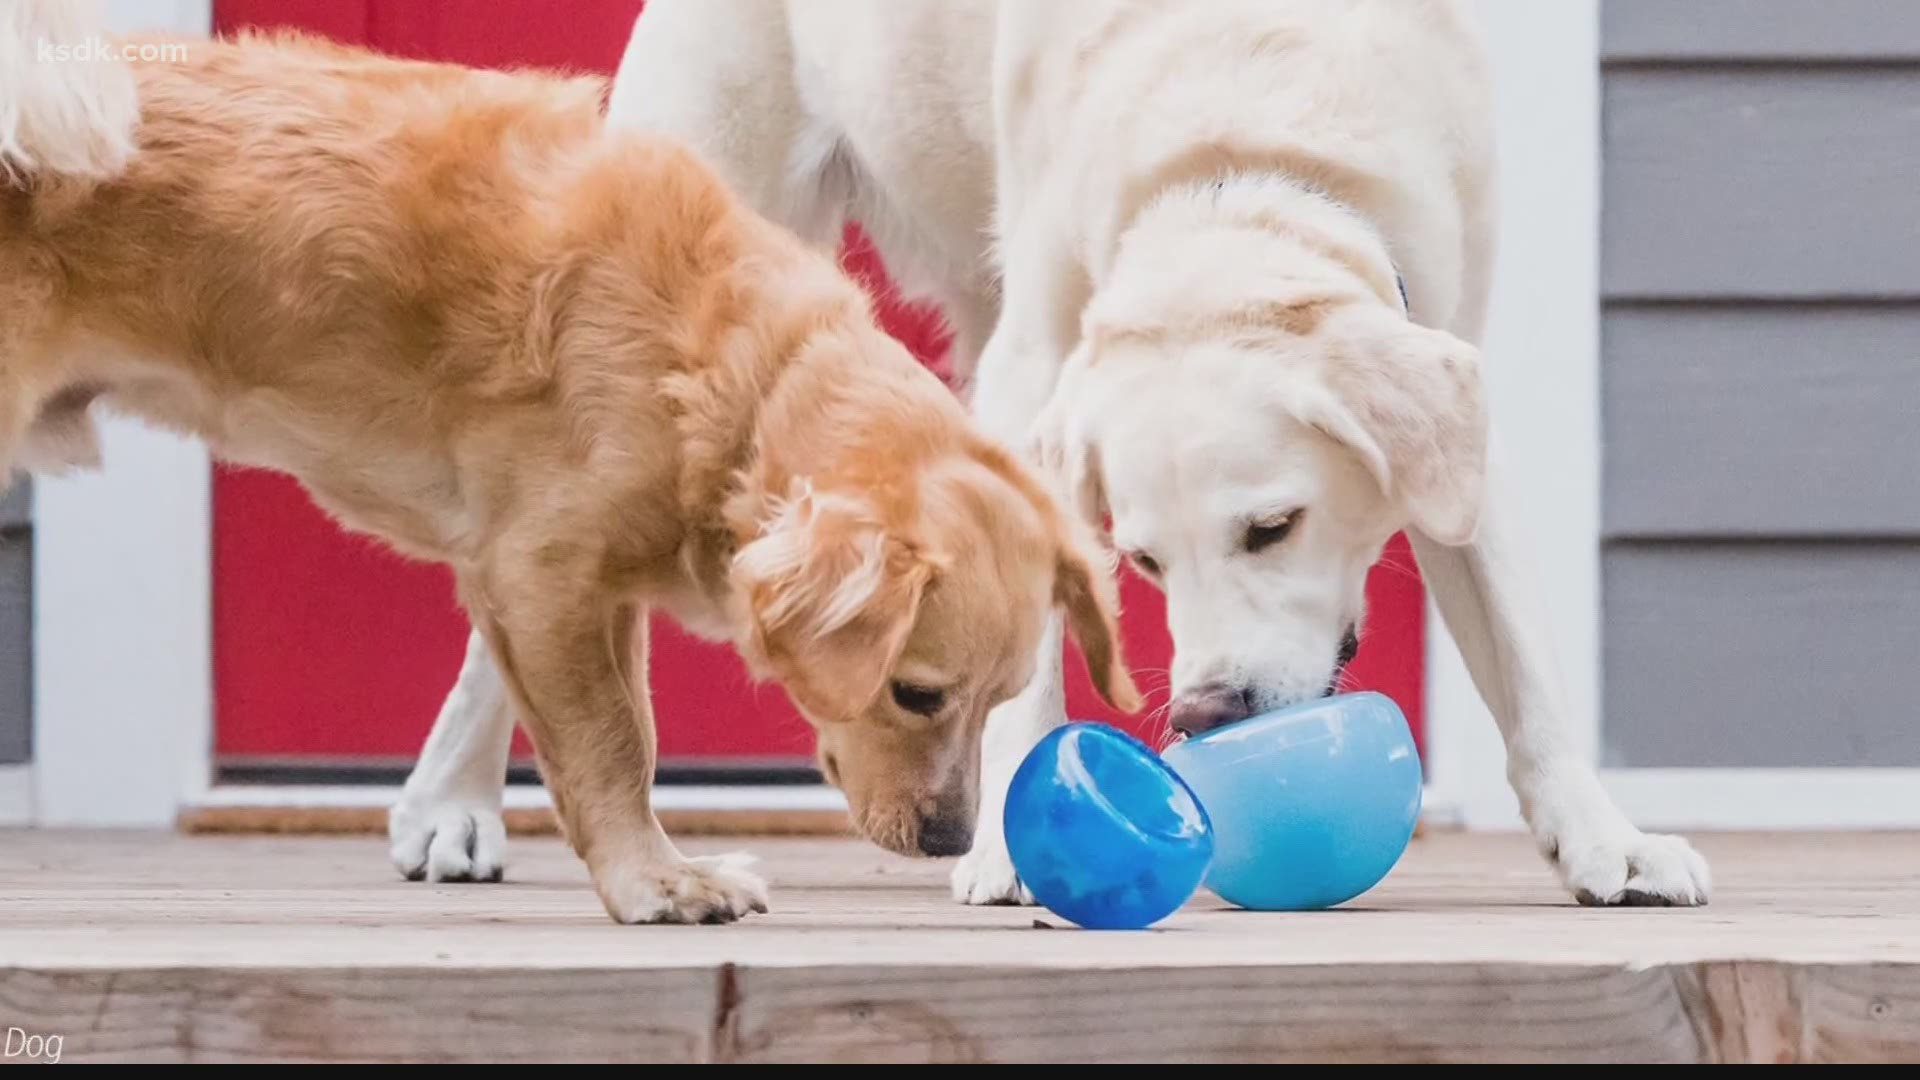 Getting the most out of your dogs puzzle toys